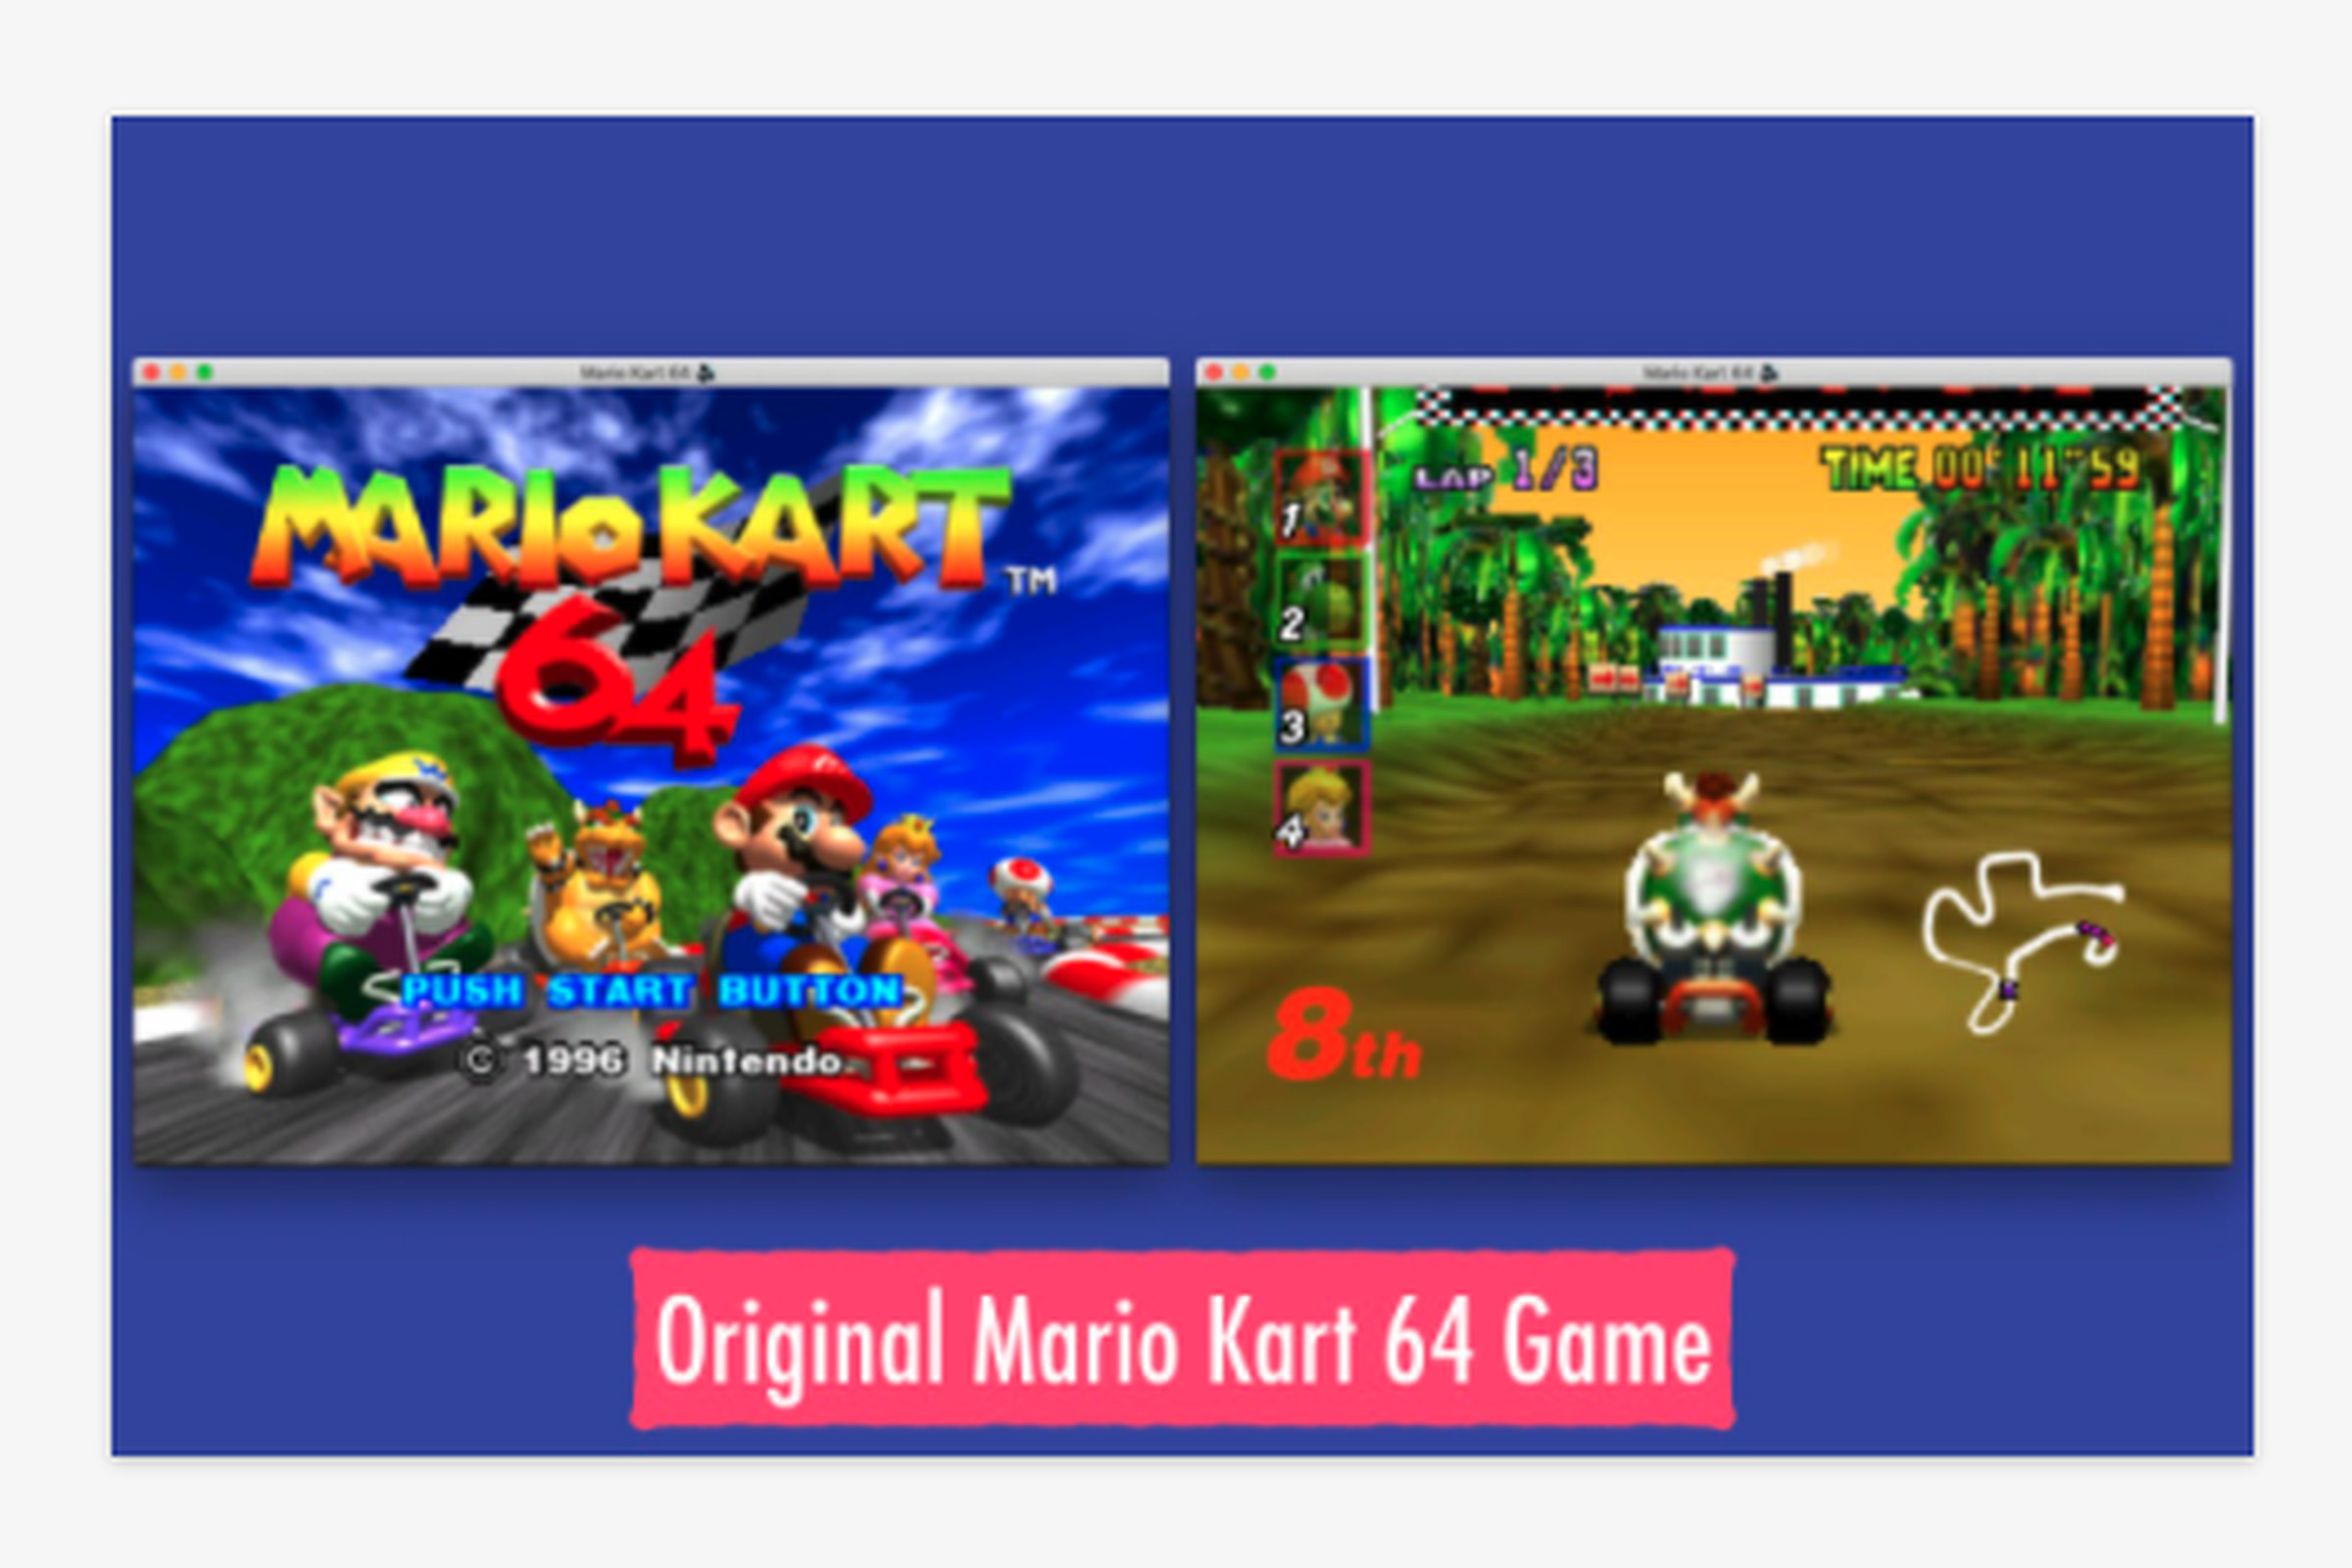 An image from the Mario Kart 64 listing on the Edge extensions store.